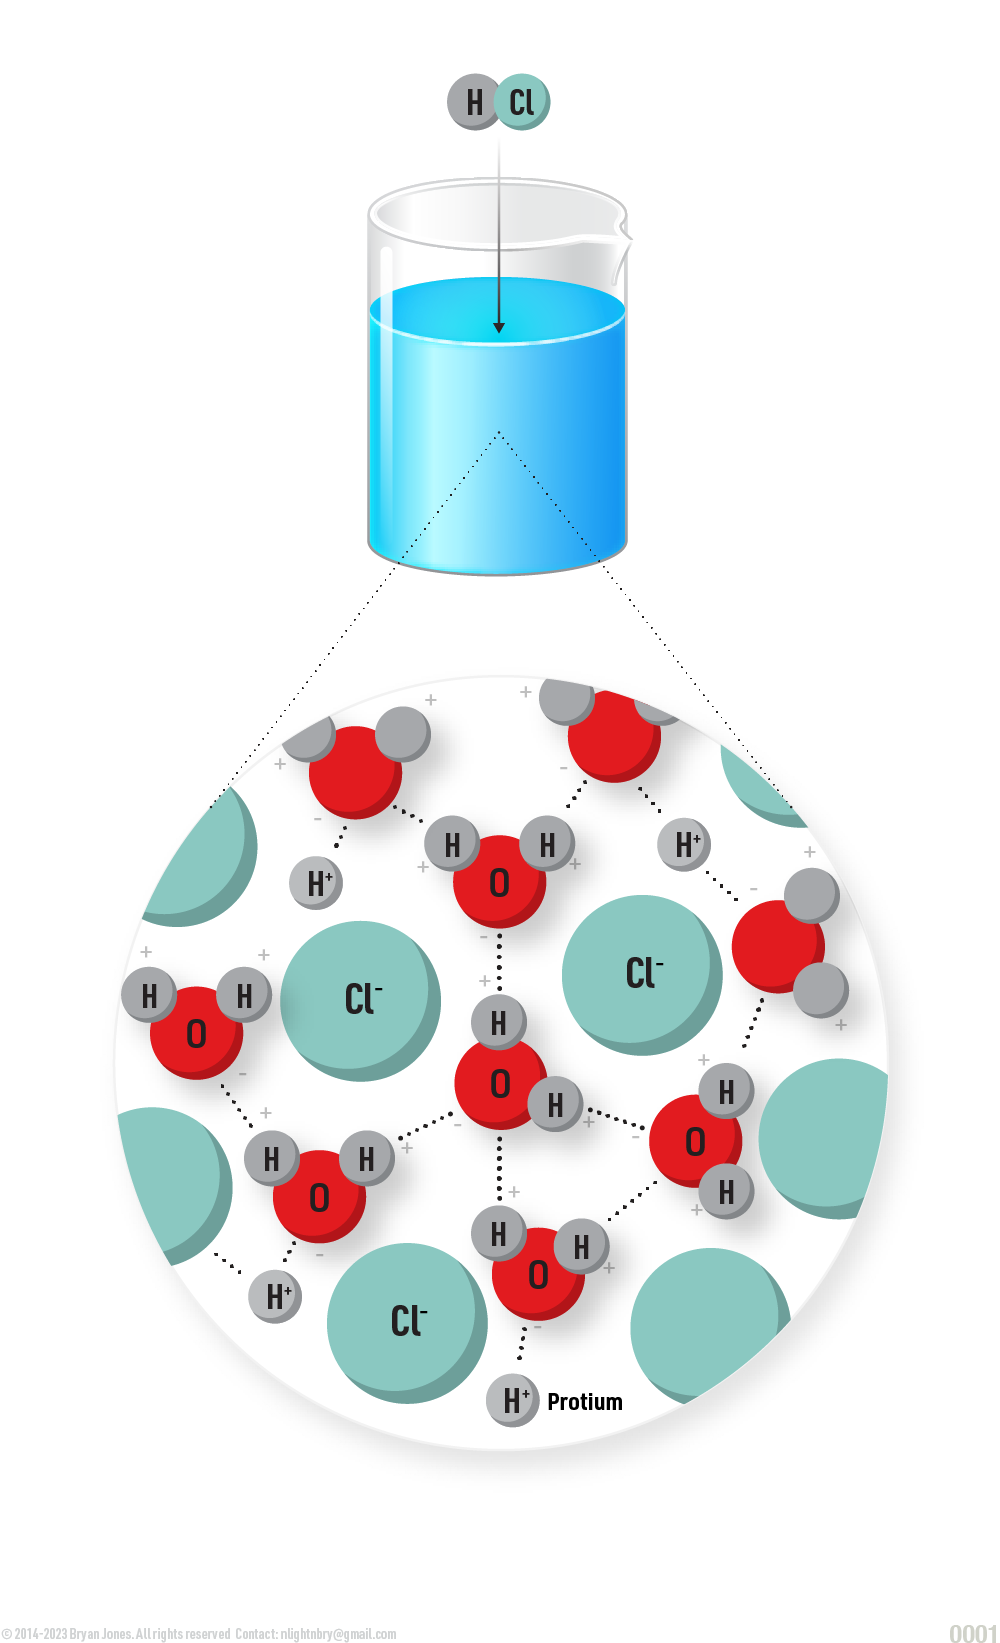  Hydrochloric acid (HCL) Molecule Graphic image diagram with an enlargement of the composition of the solution, showing how protium are situated between chloride atoms, which being electro-statically connected to water molecules. 